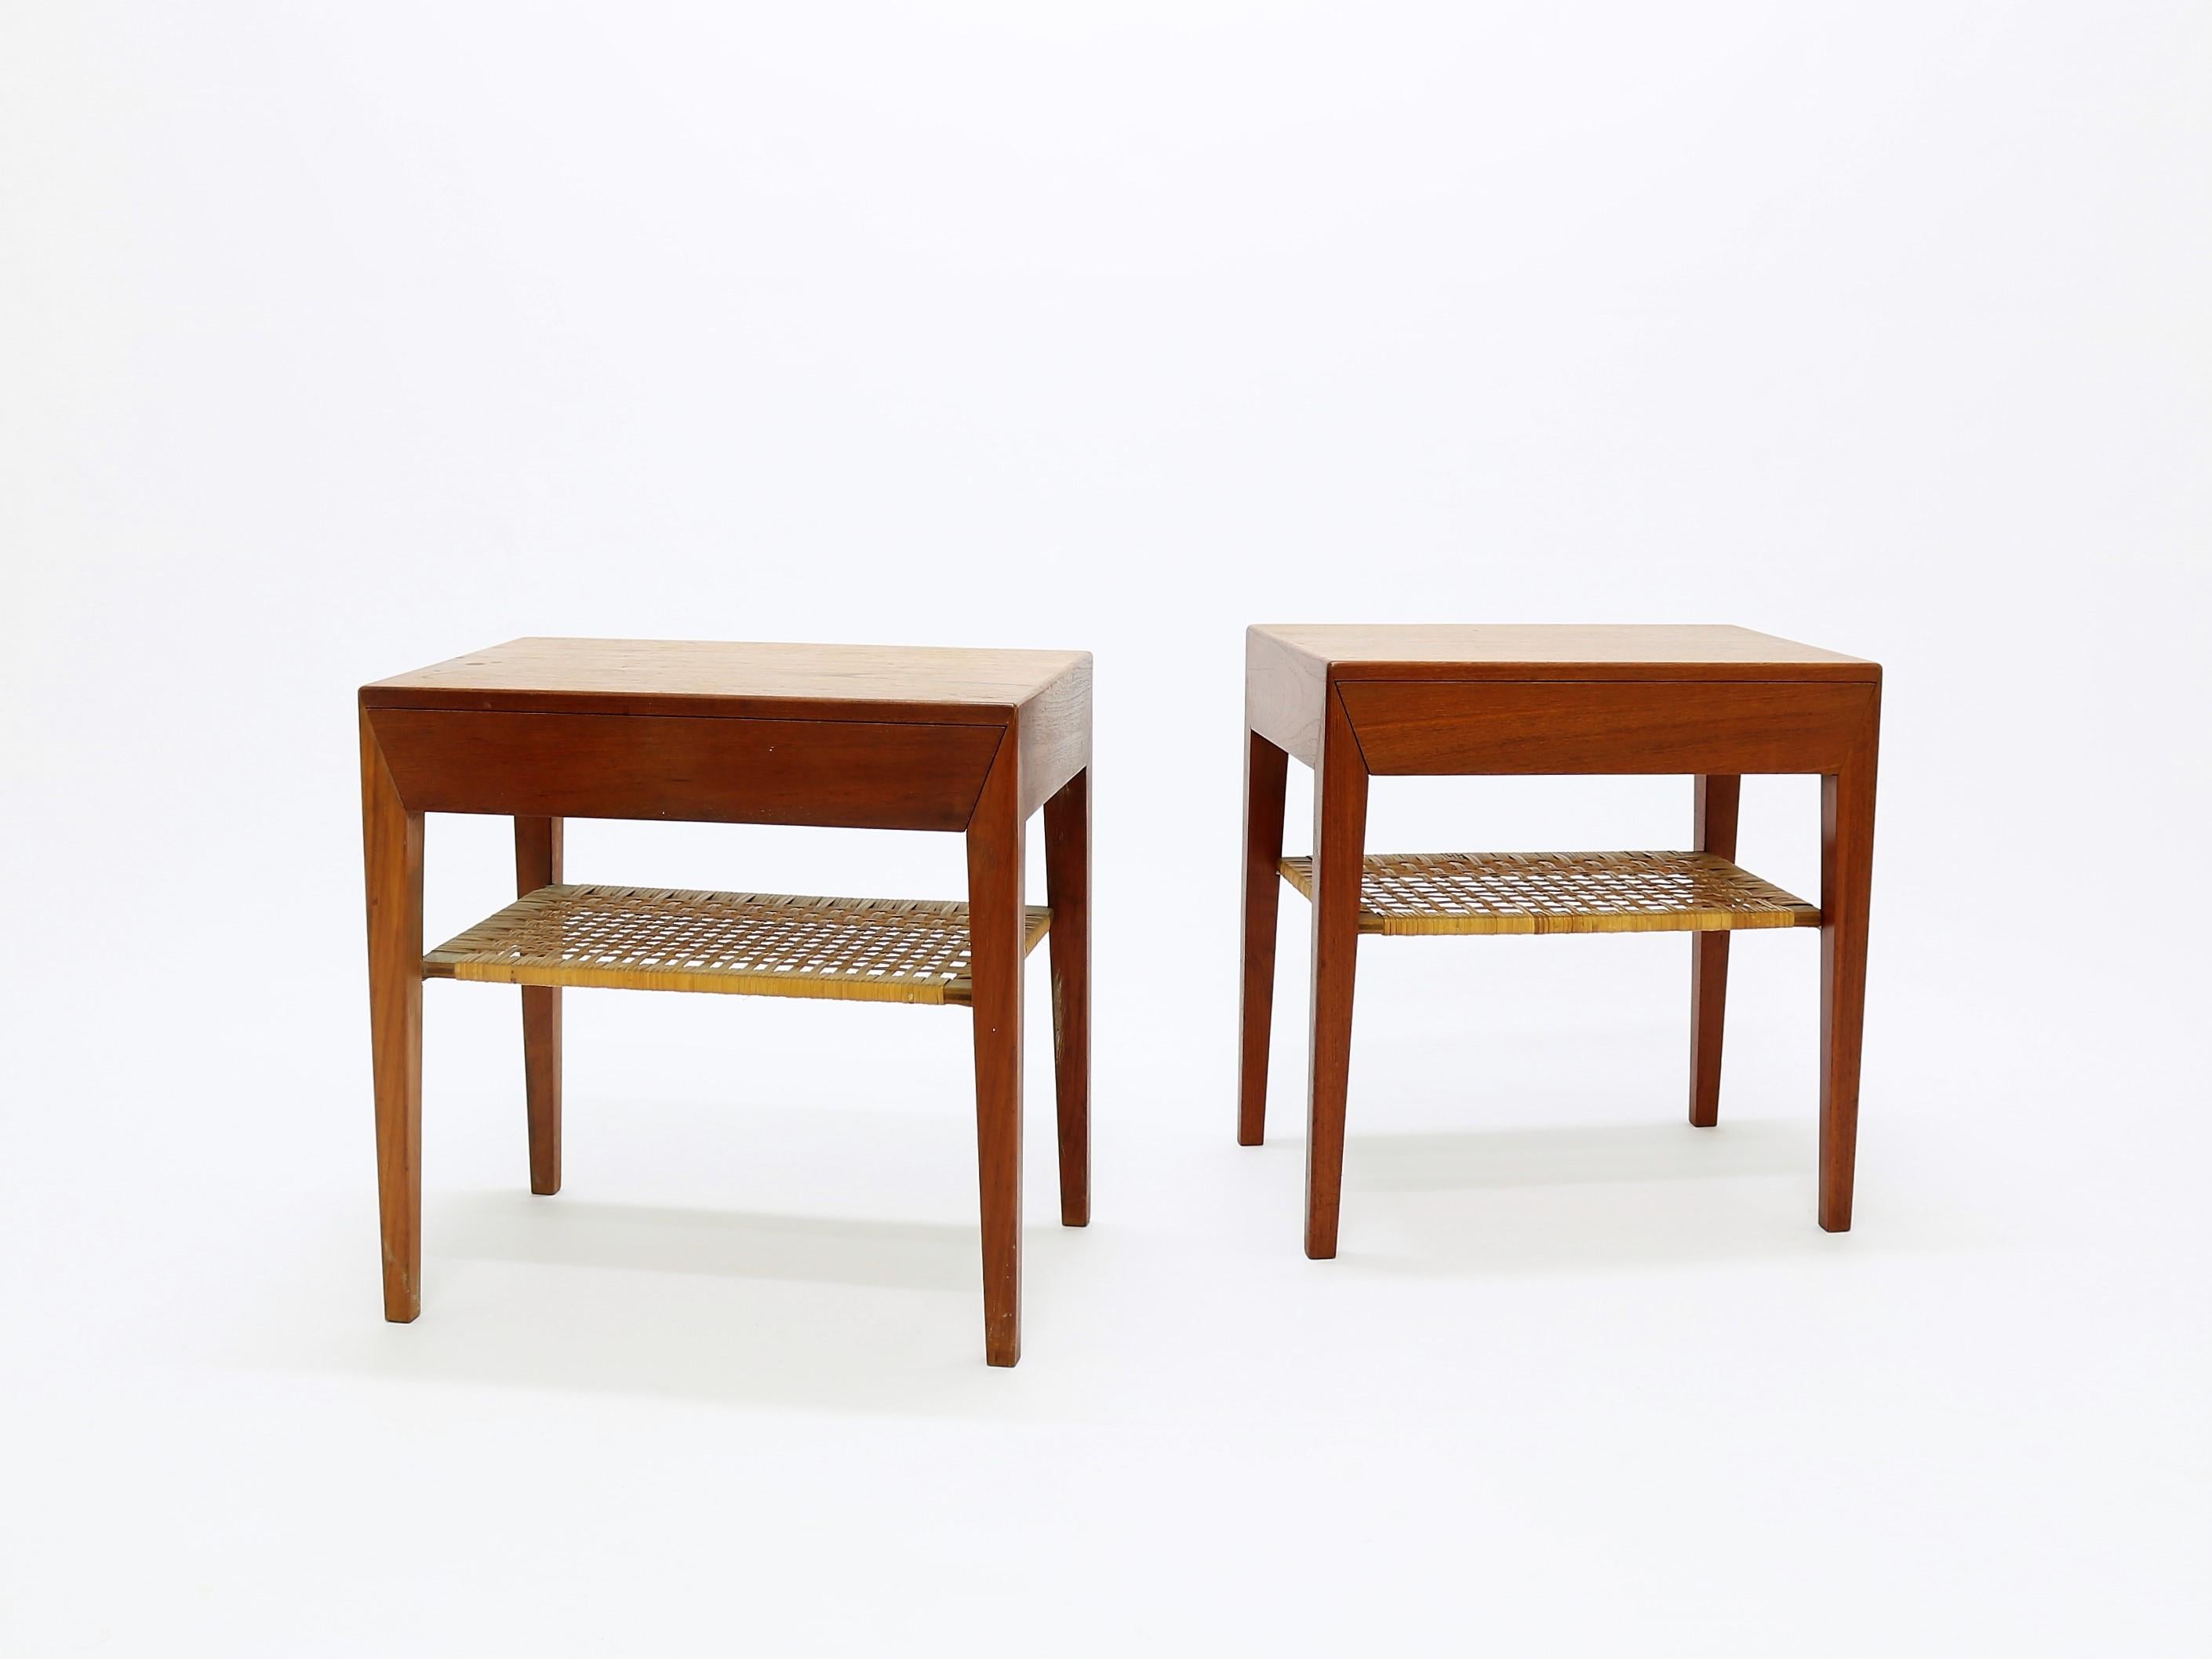 Pair of side tables in teak and cane by Severin Hansen Jr. for Haslev Møbelsnedkeri in the 1950 and 1960s. The tables have a drawer and a cane shelf. All original parts in great condition.